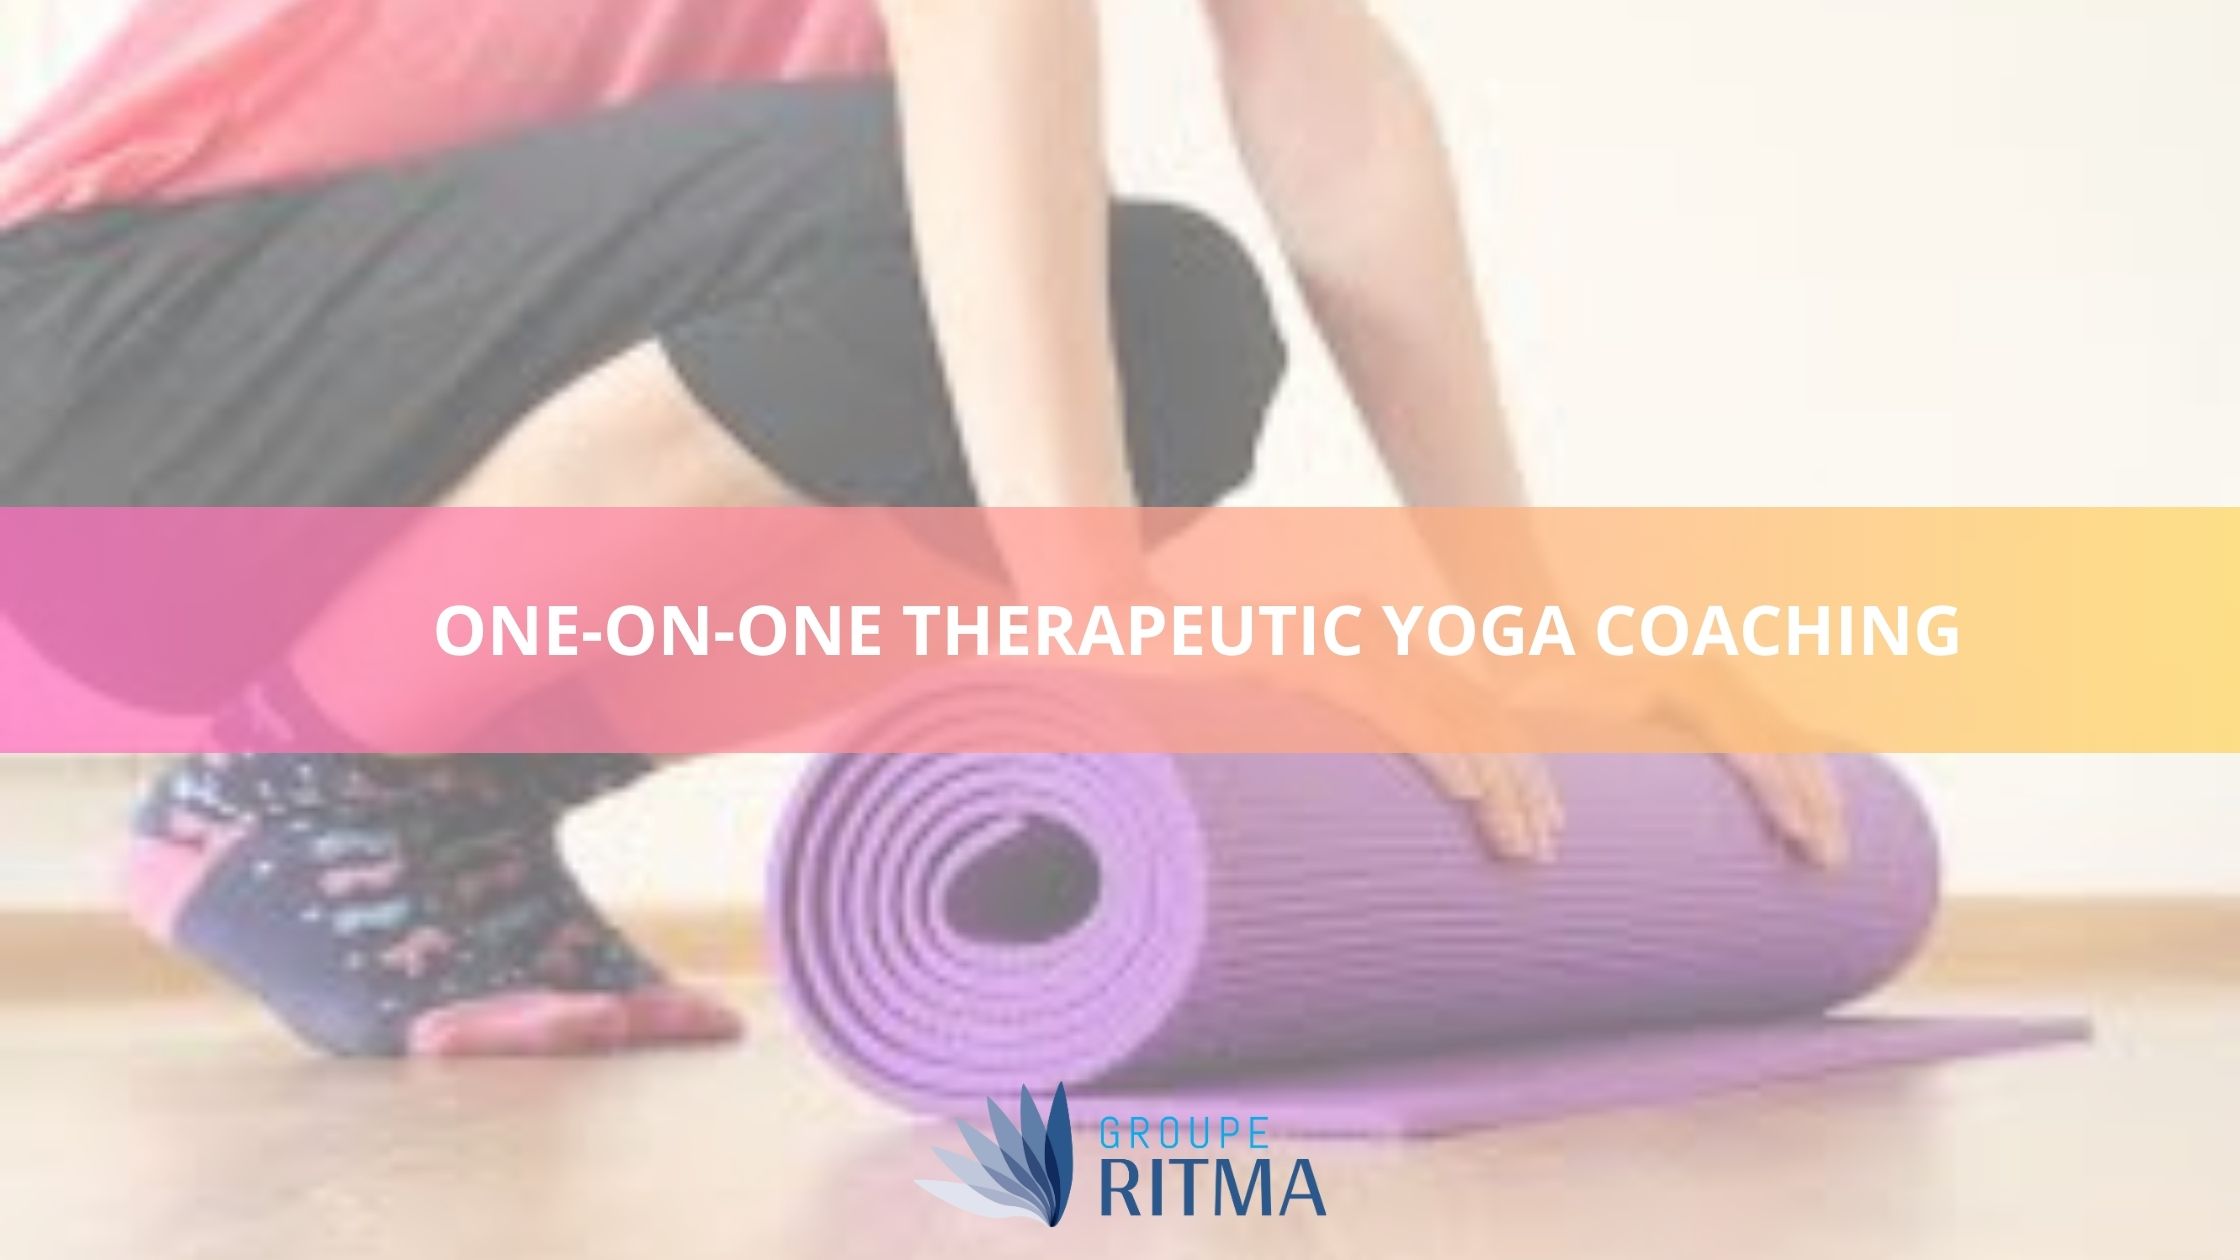 One-on-one Therapeutic Yoga Coaching